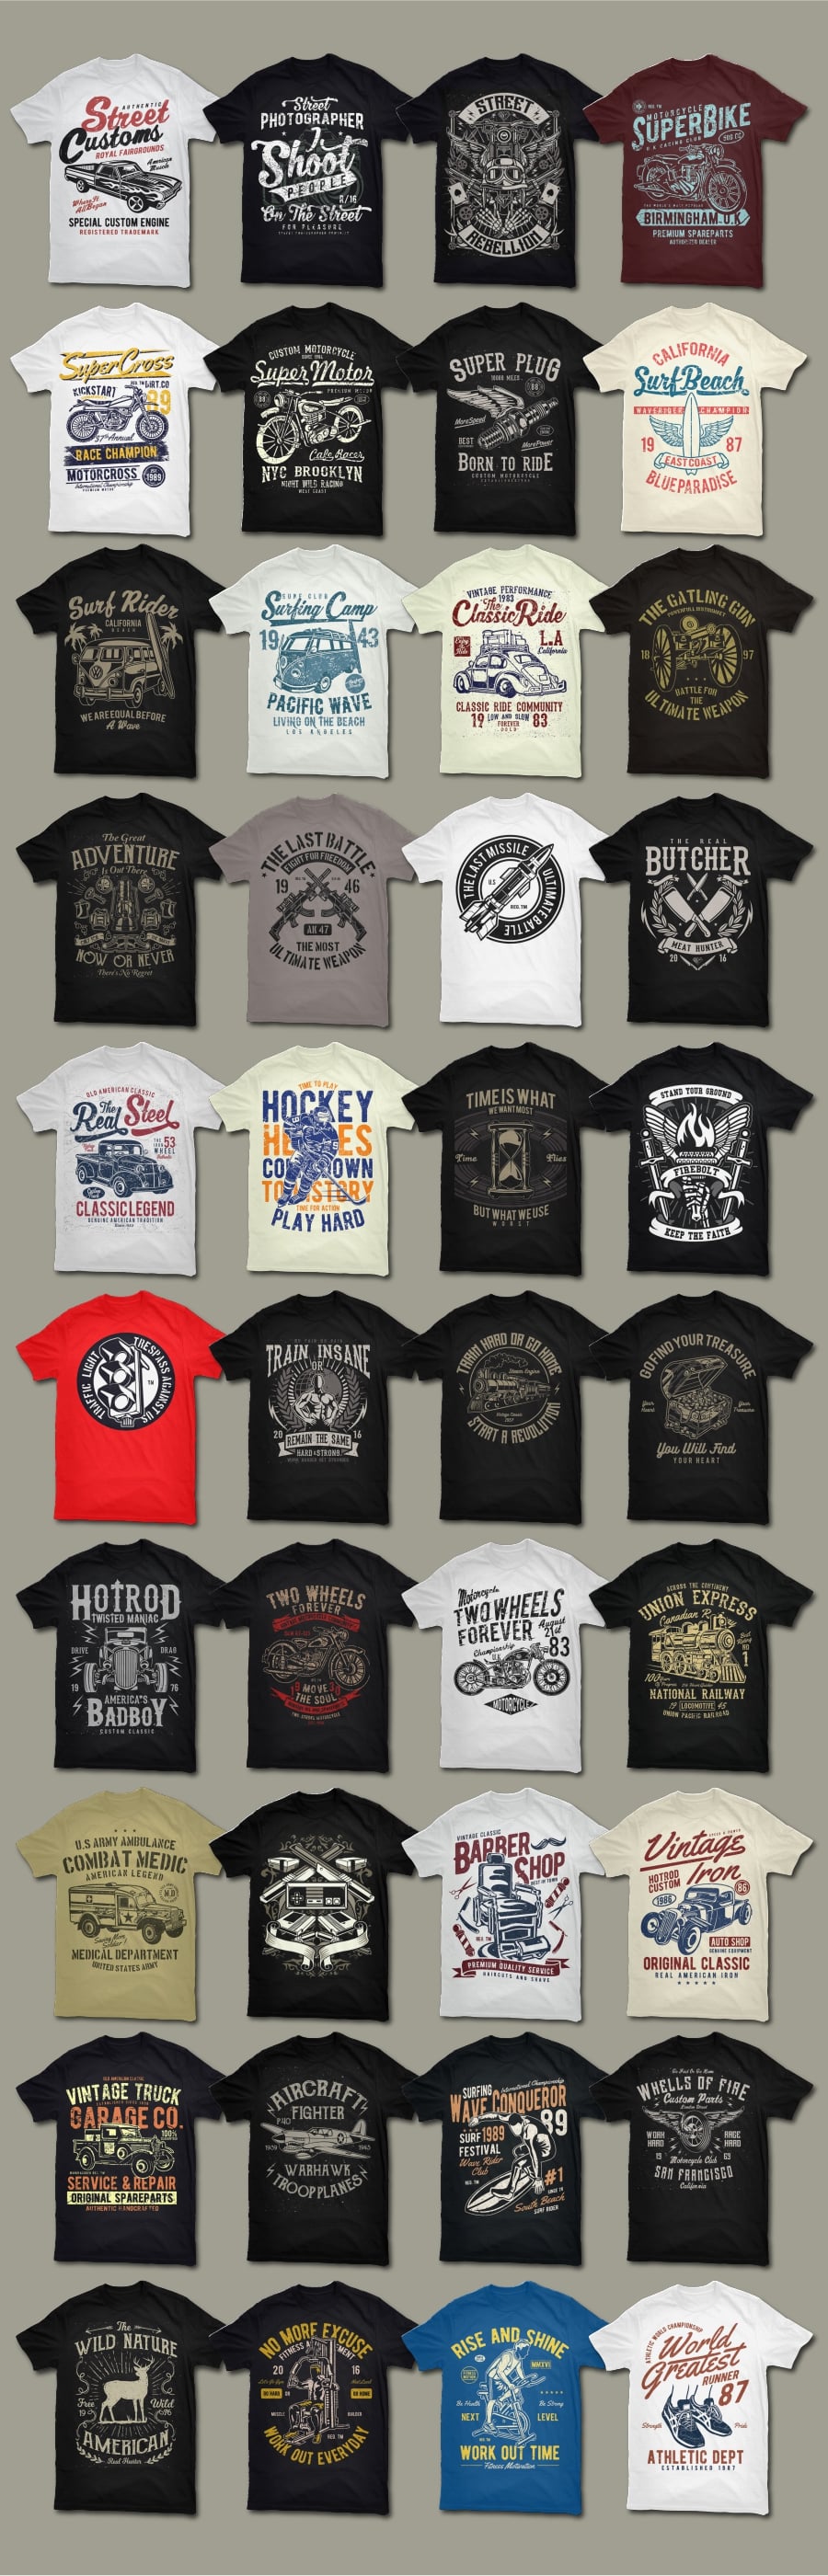 A huge collection of different T-shirts with graphics for every taste.